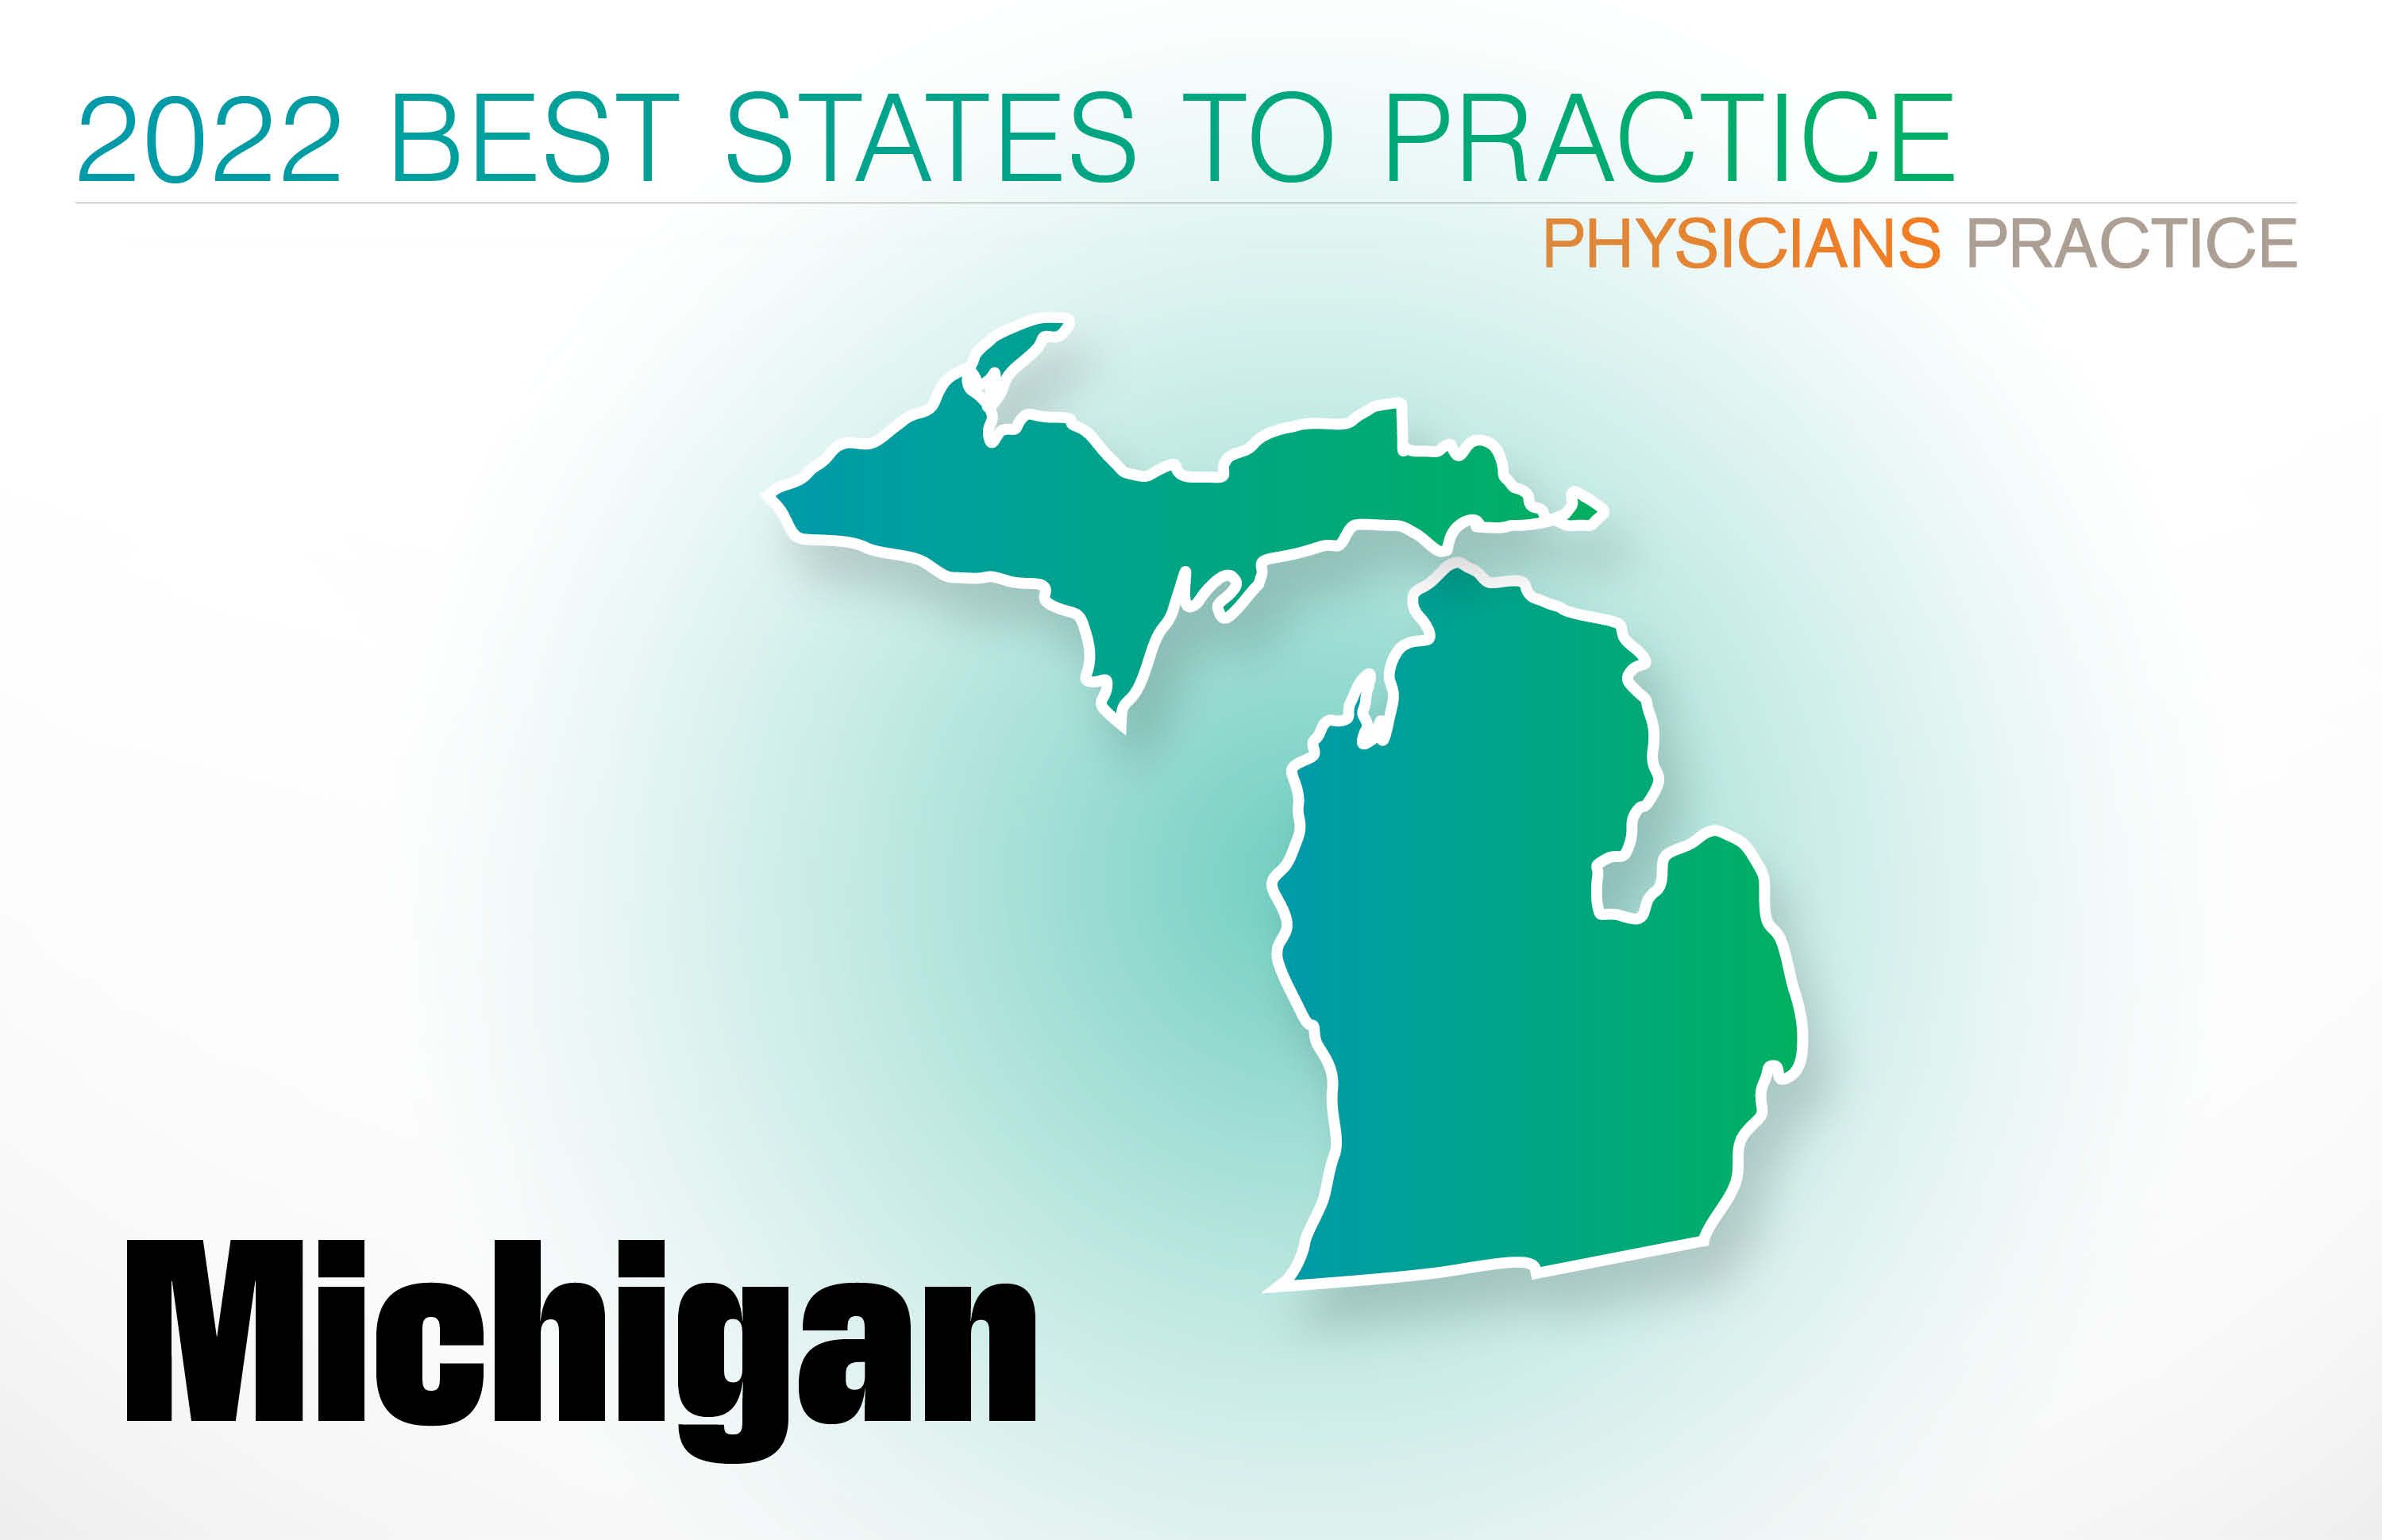 #32 Michigan Rankings: Cost of living: 10 Physician density: 36 Amount of state business taxes collected: 12 Average malpractice insurance rates: 40 Quality of life: 31 GPCI: 45